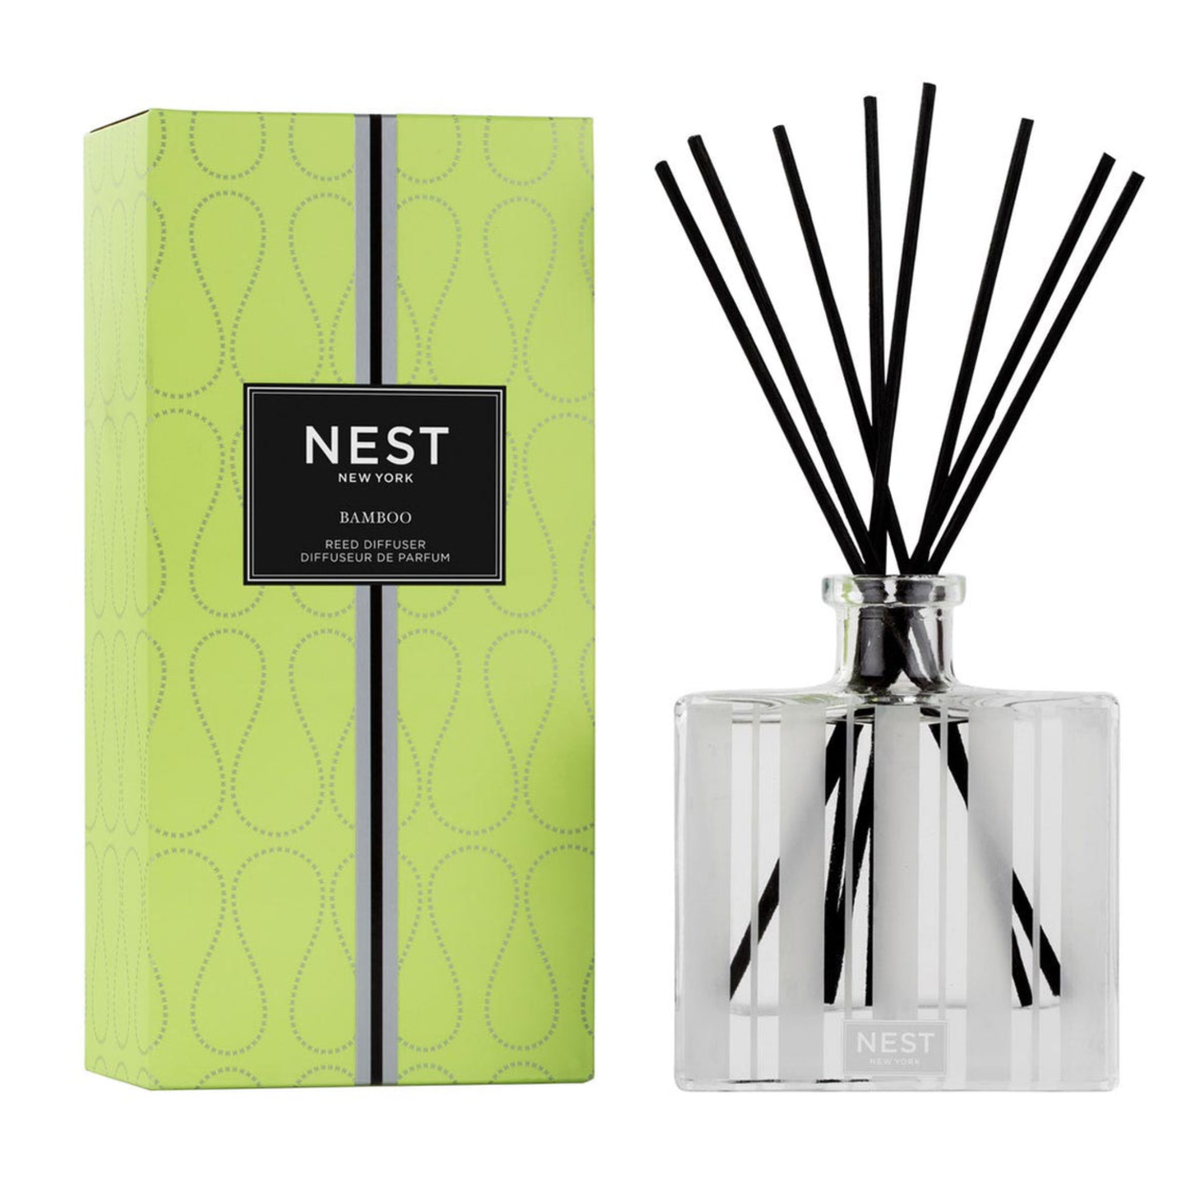 Product Image of Nest New York Bamboo Reed Diffuser with Box